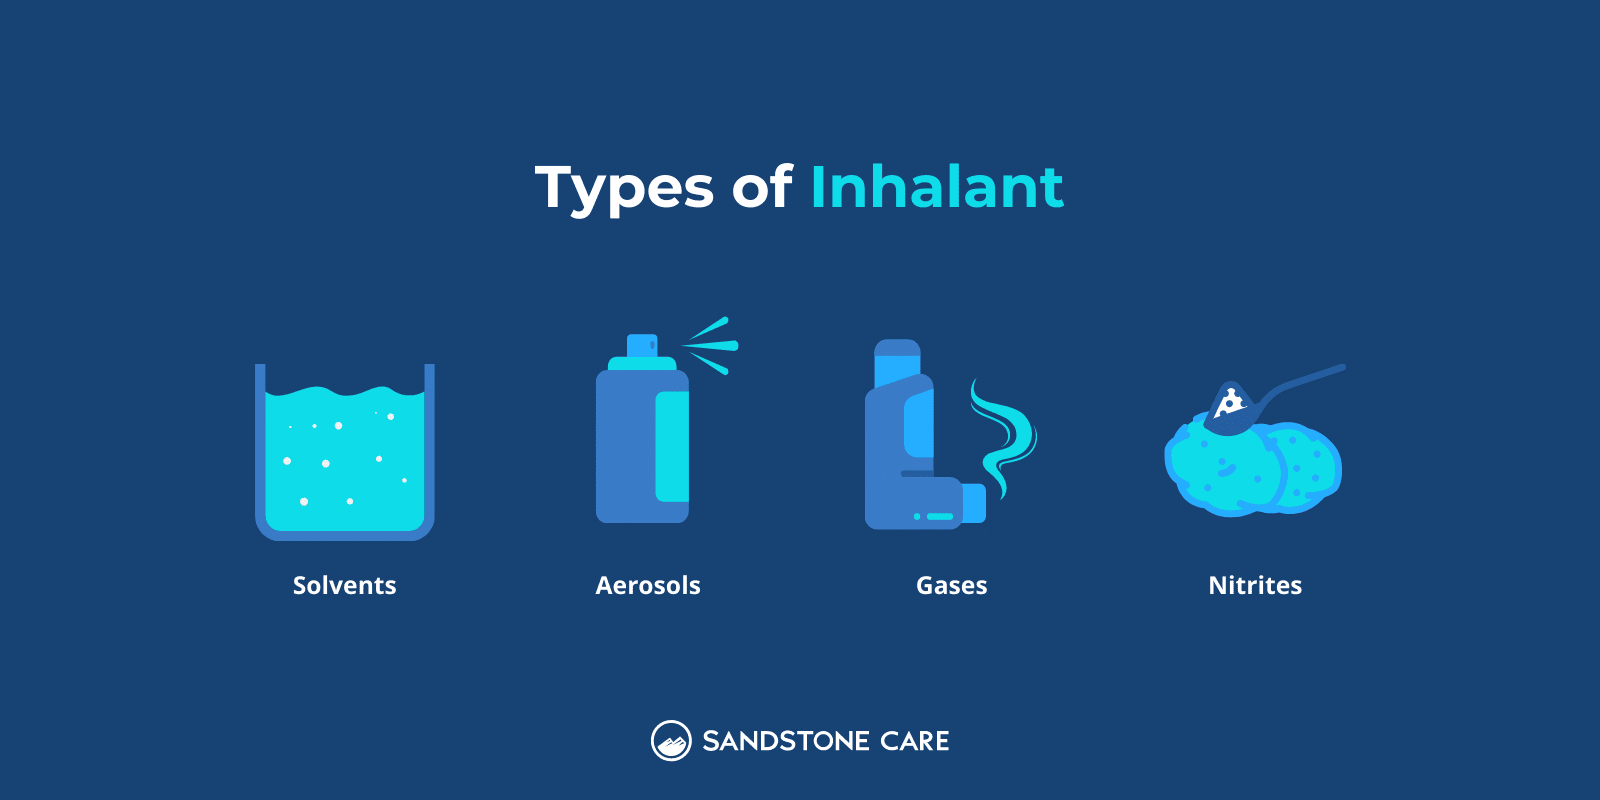 4 Types of inhalant - solvents, aerosols, gases, and nitrites represented with descriptive illustrations